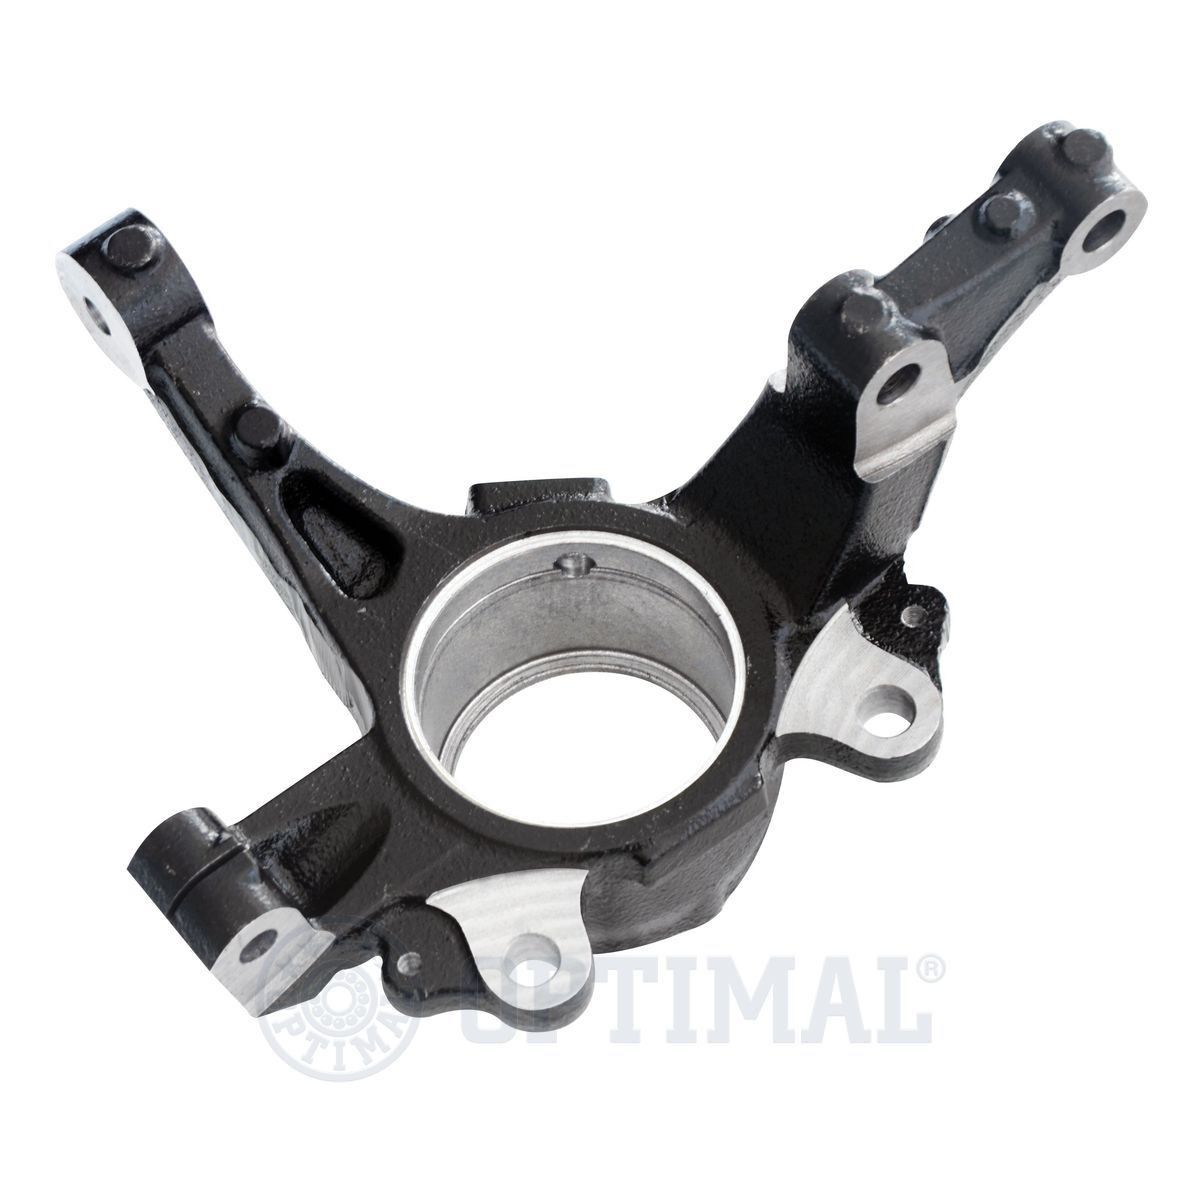 Fiat FIORINO Steering knuckle OPTIMAL KN-801838-01-L cheap